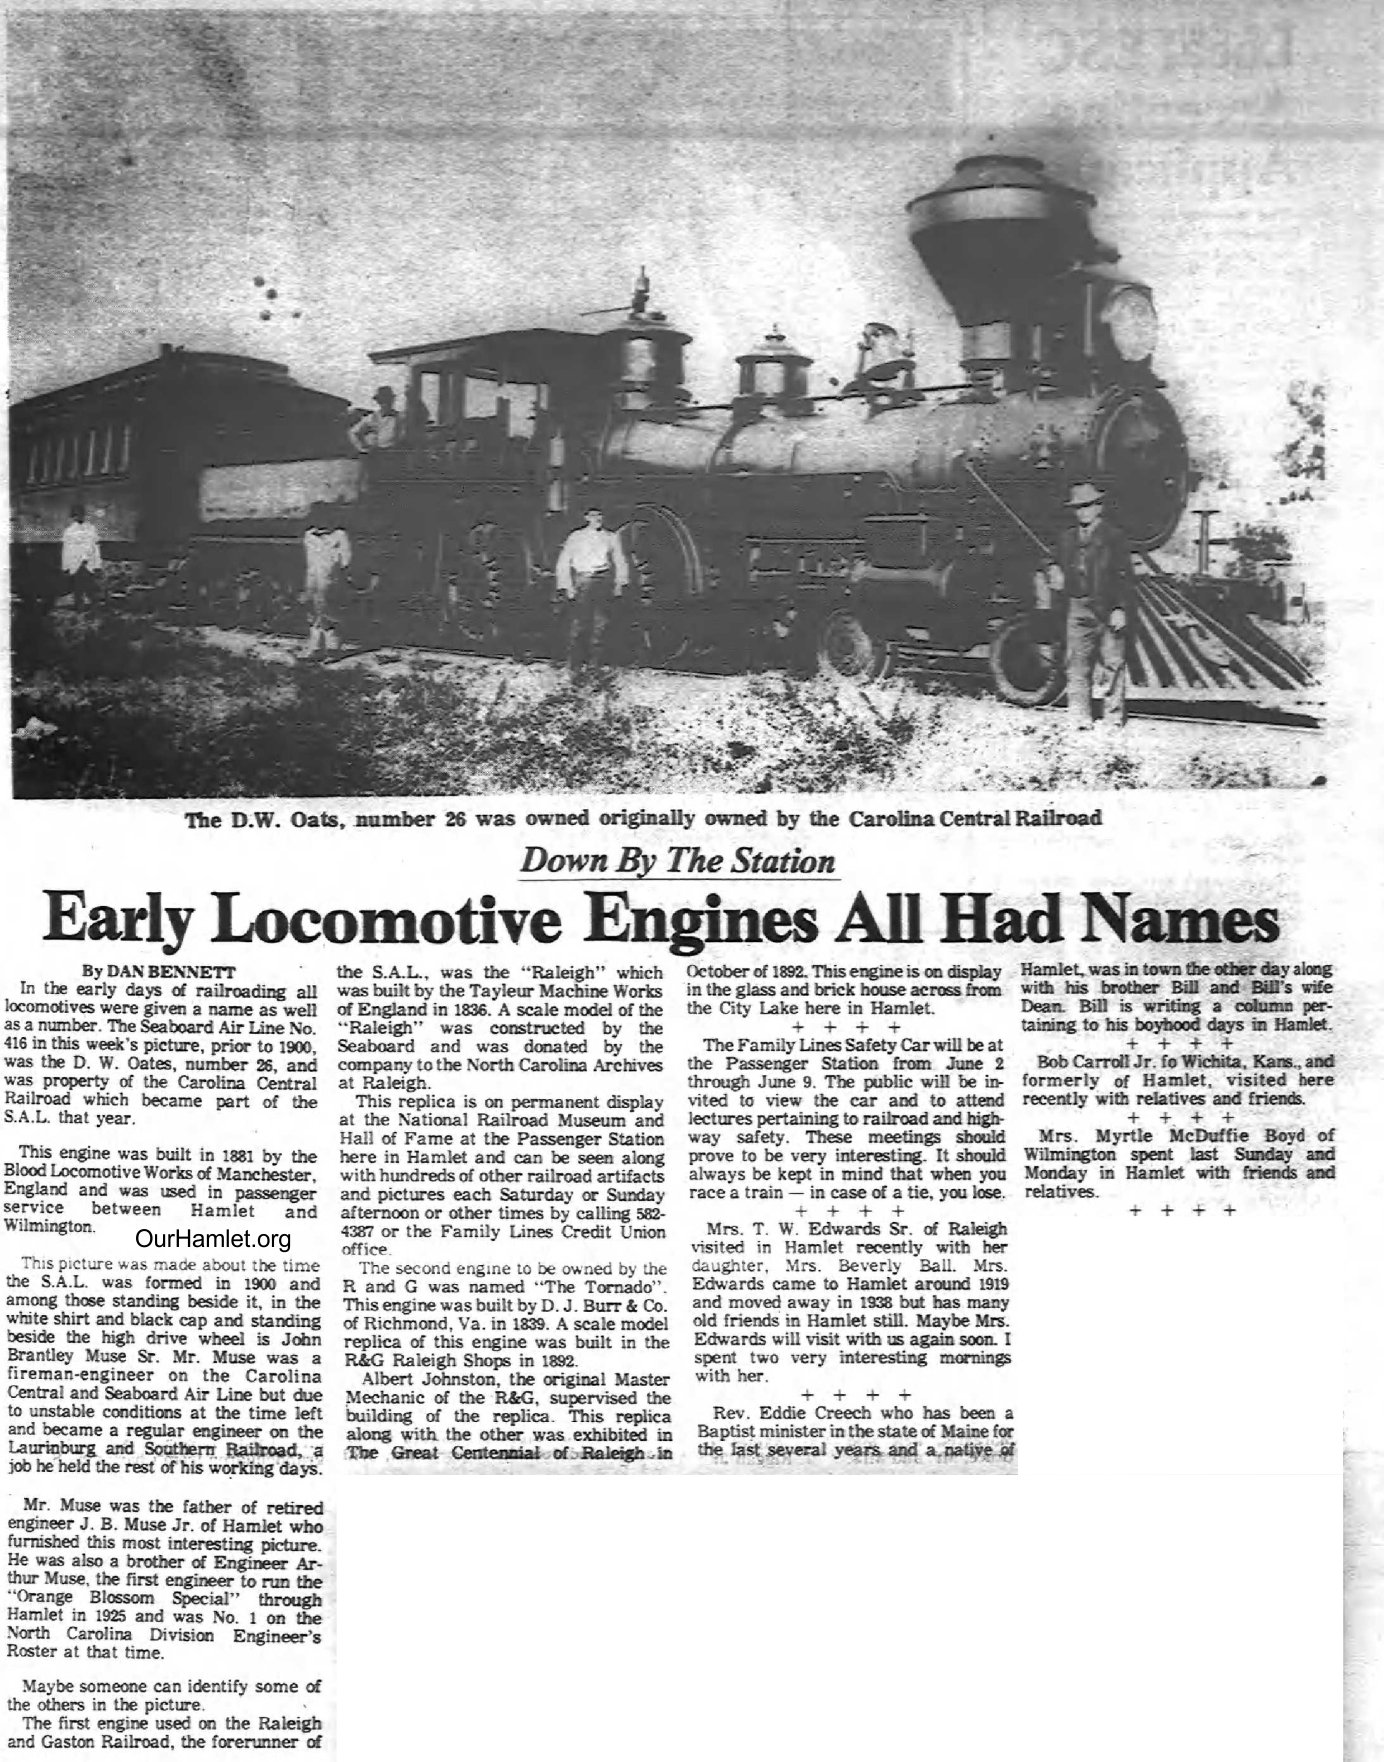 Down by the Station - Early Locomotive Engines All Had Names OH.jpg